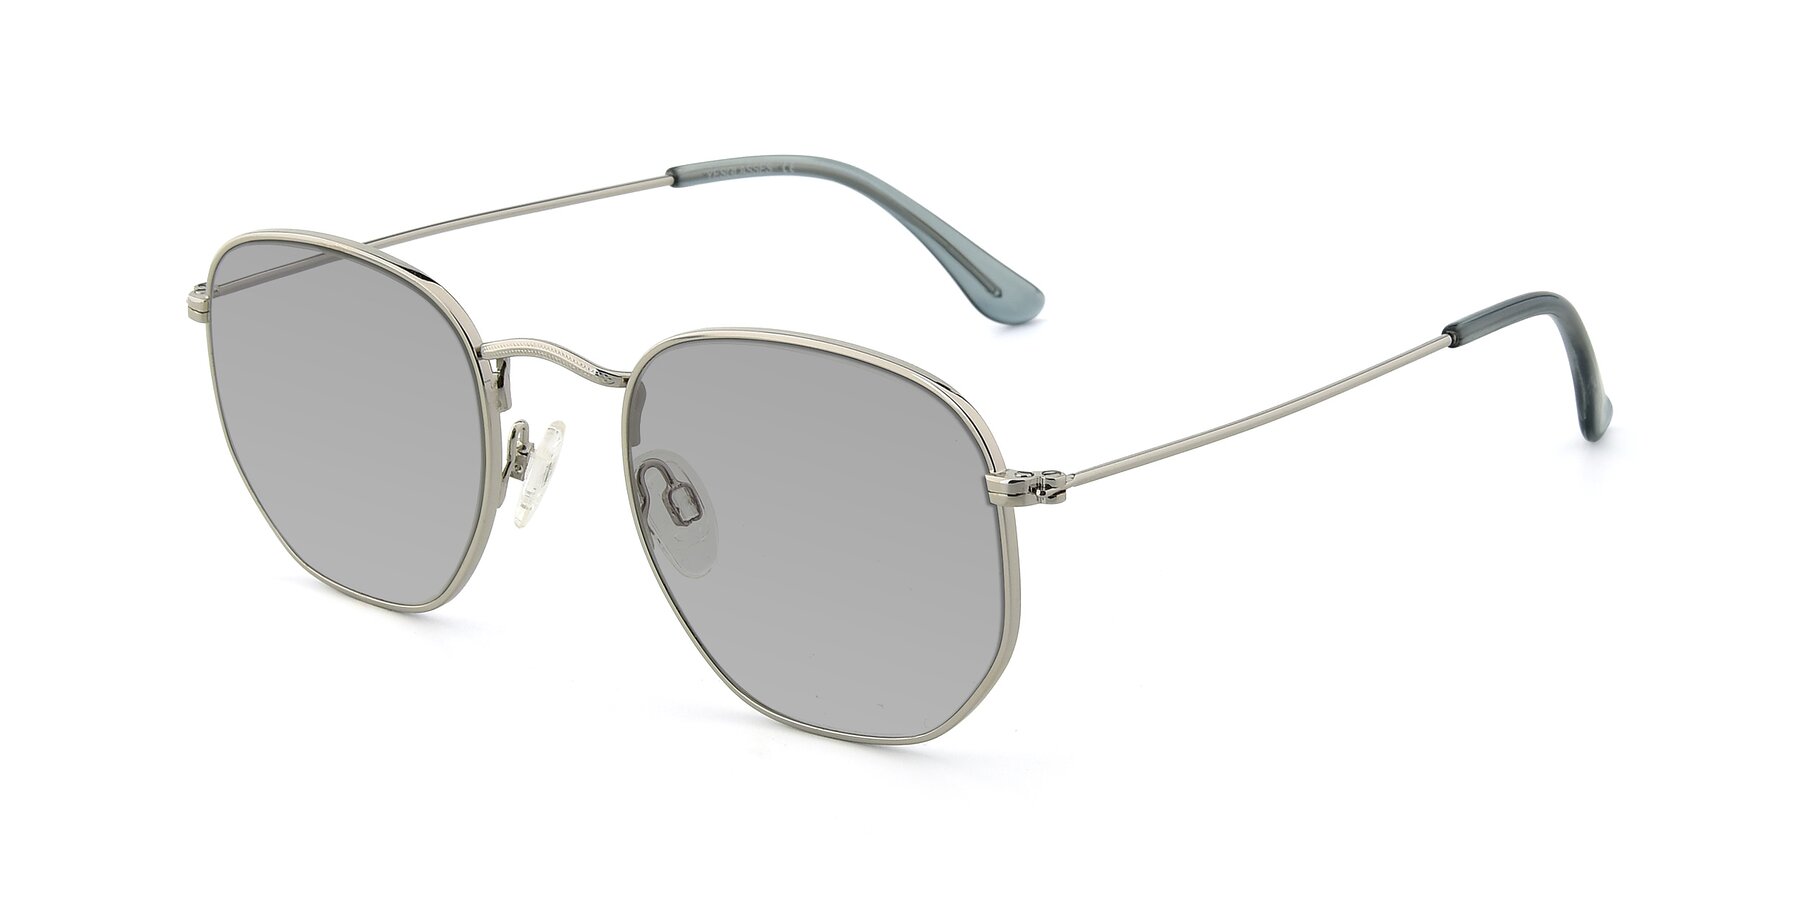 Angle of SSR1943 in Silver with Light Gray Tinted Lenses